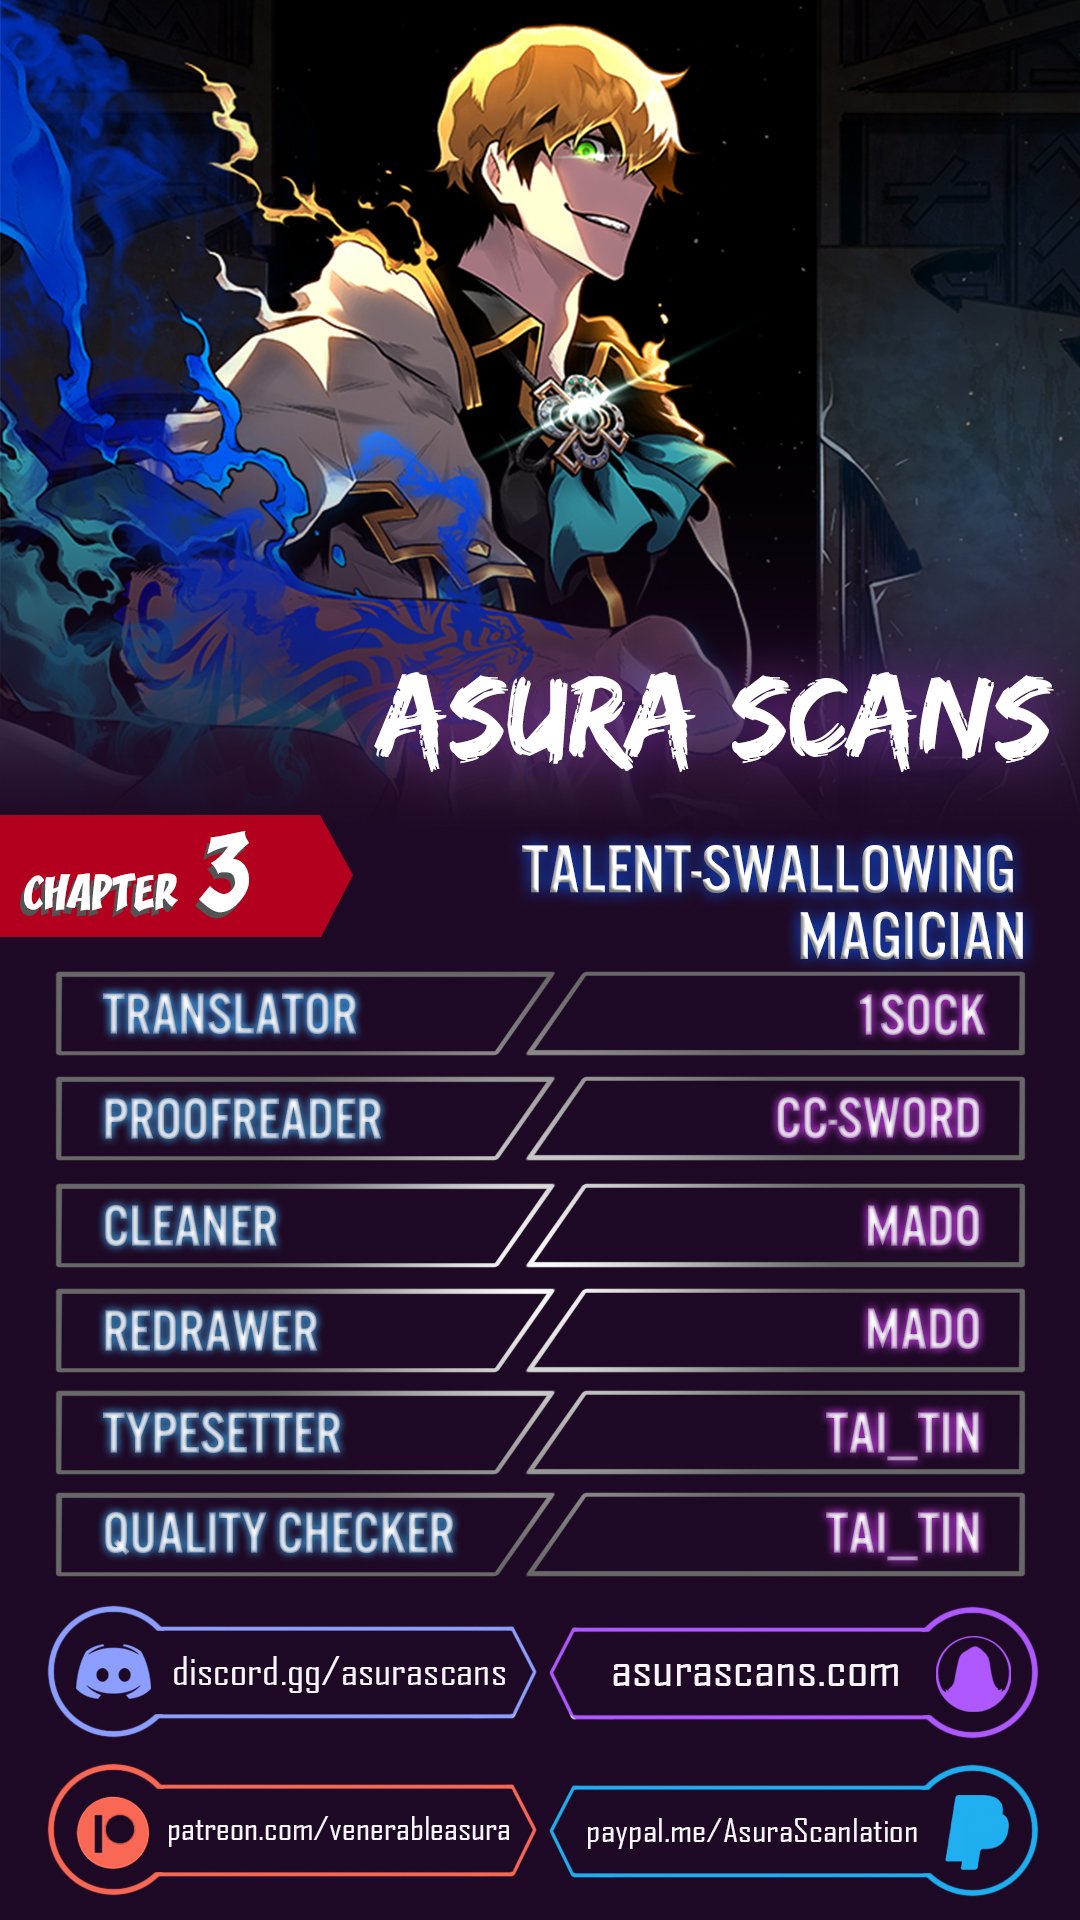 Talent-Swallowing Magician - Chapter 15401 - Image 1